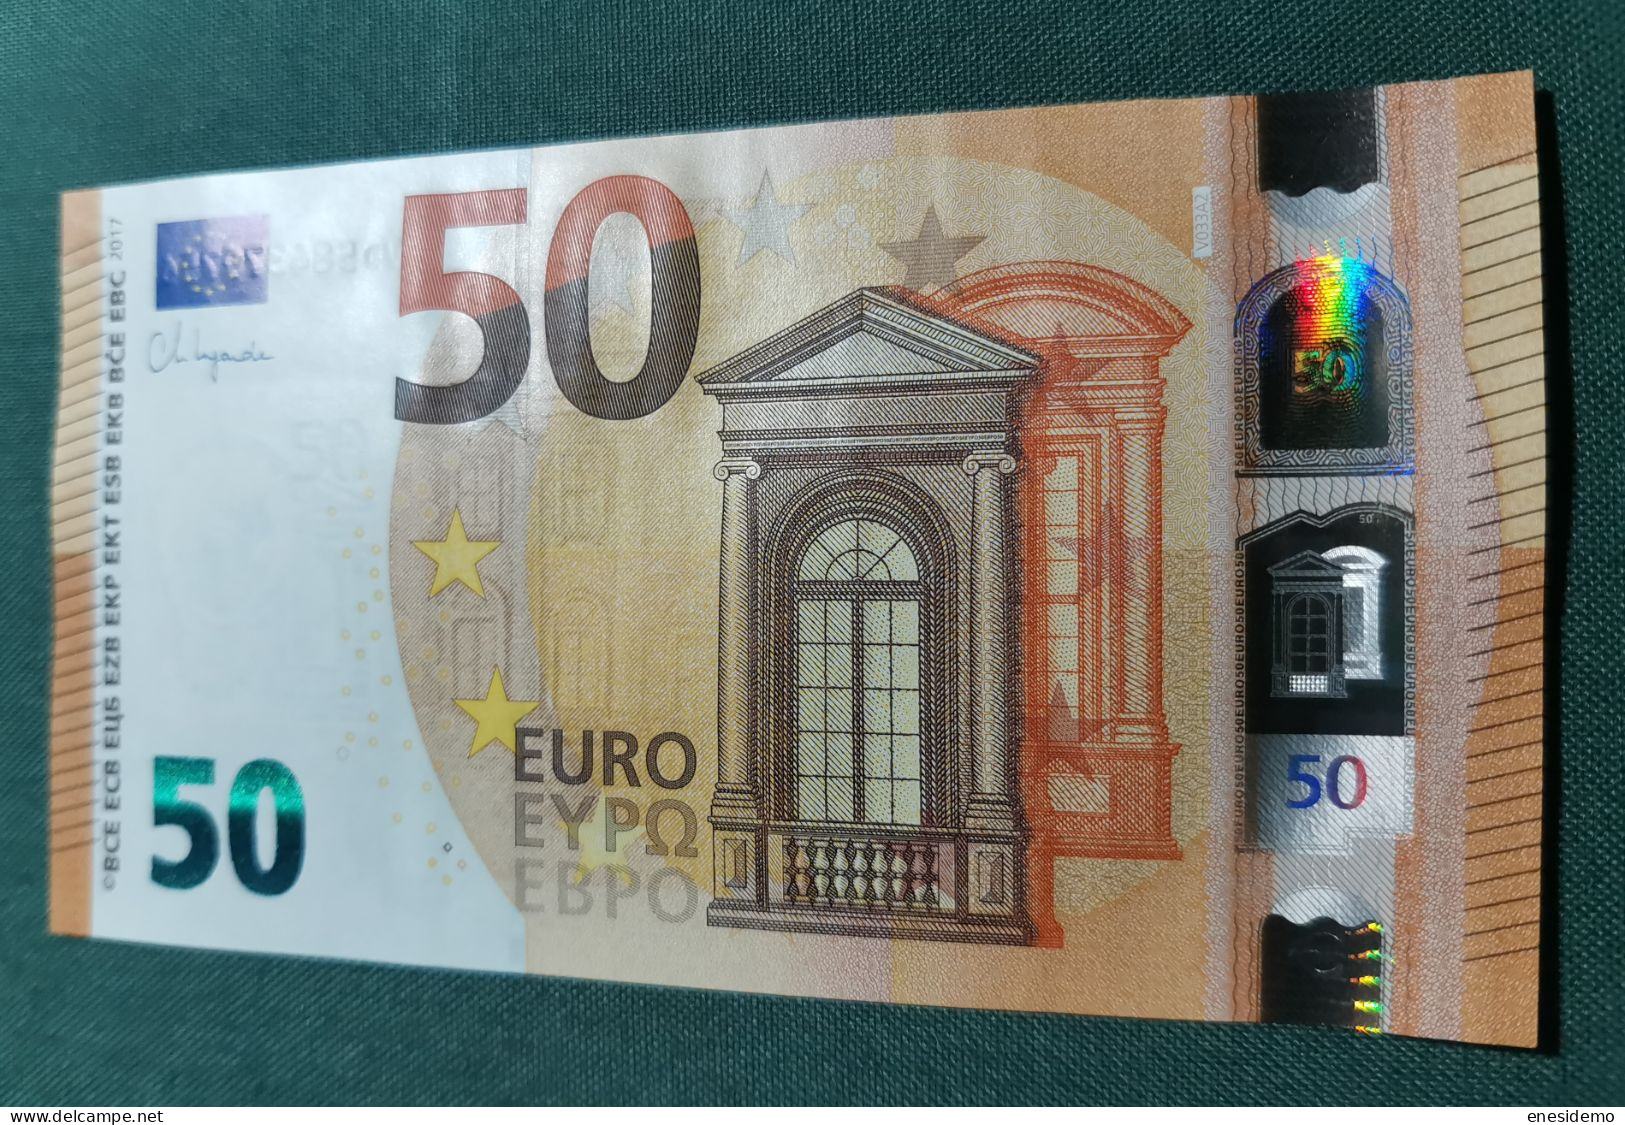 50 EURO V033A2 VD SPAIN 2017 LAGARDE SC FDS UNCIRCULATED PERFECT - 50 Euro